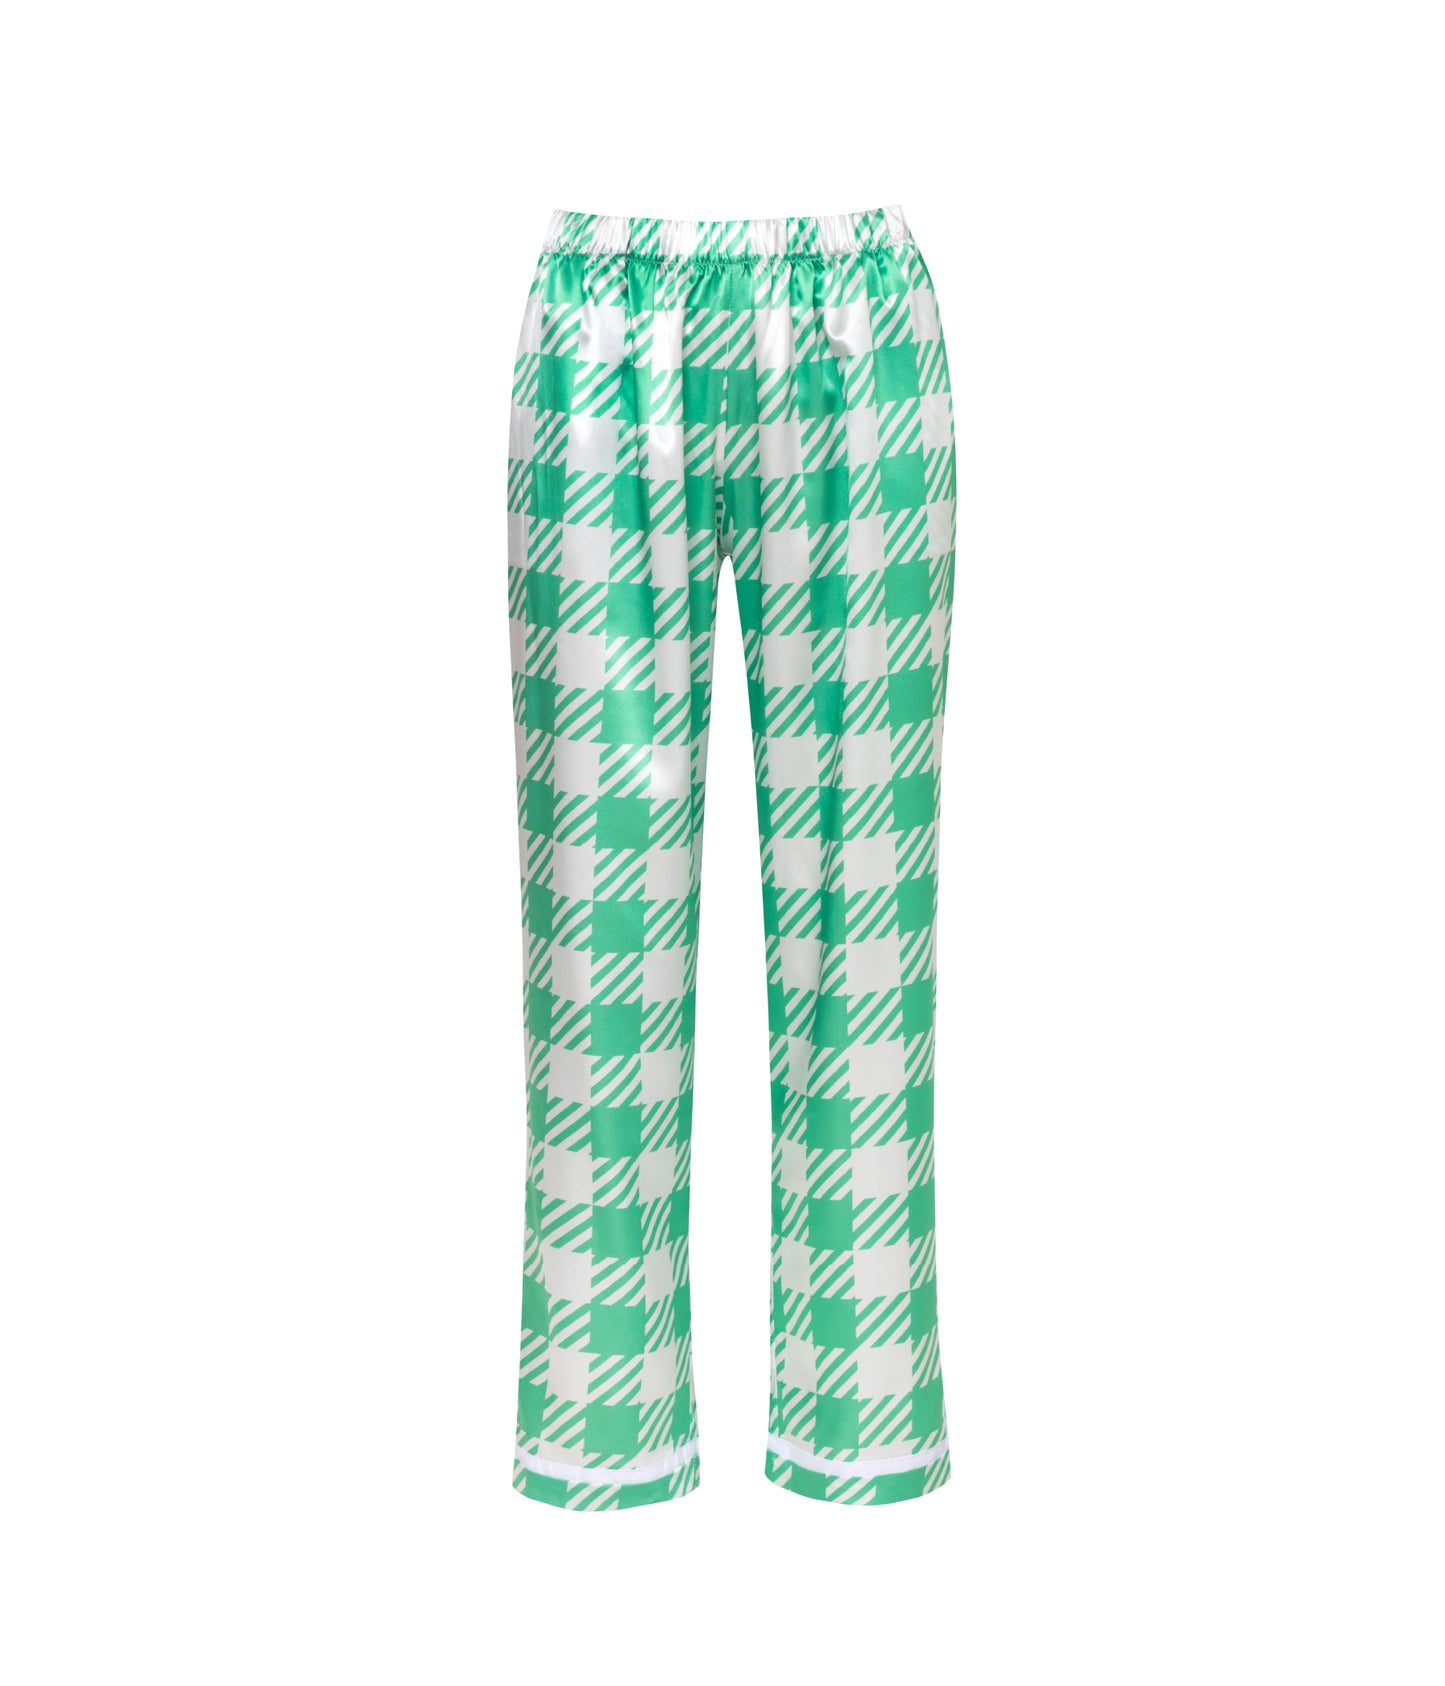 Verdelimon - Pants - Maui - Printed - Green Squares - Front